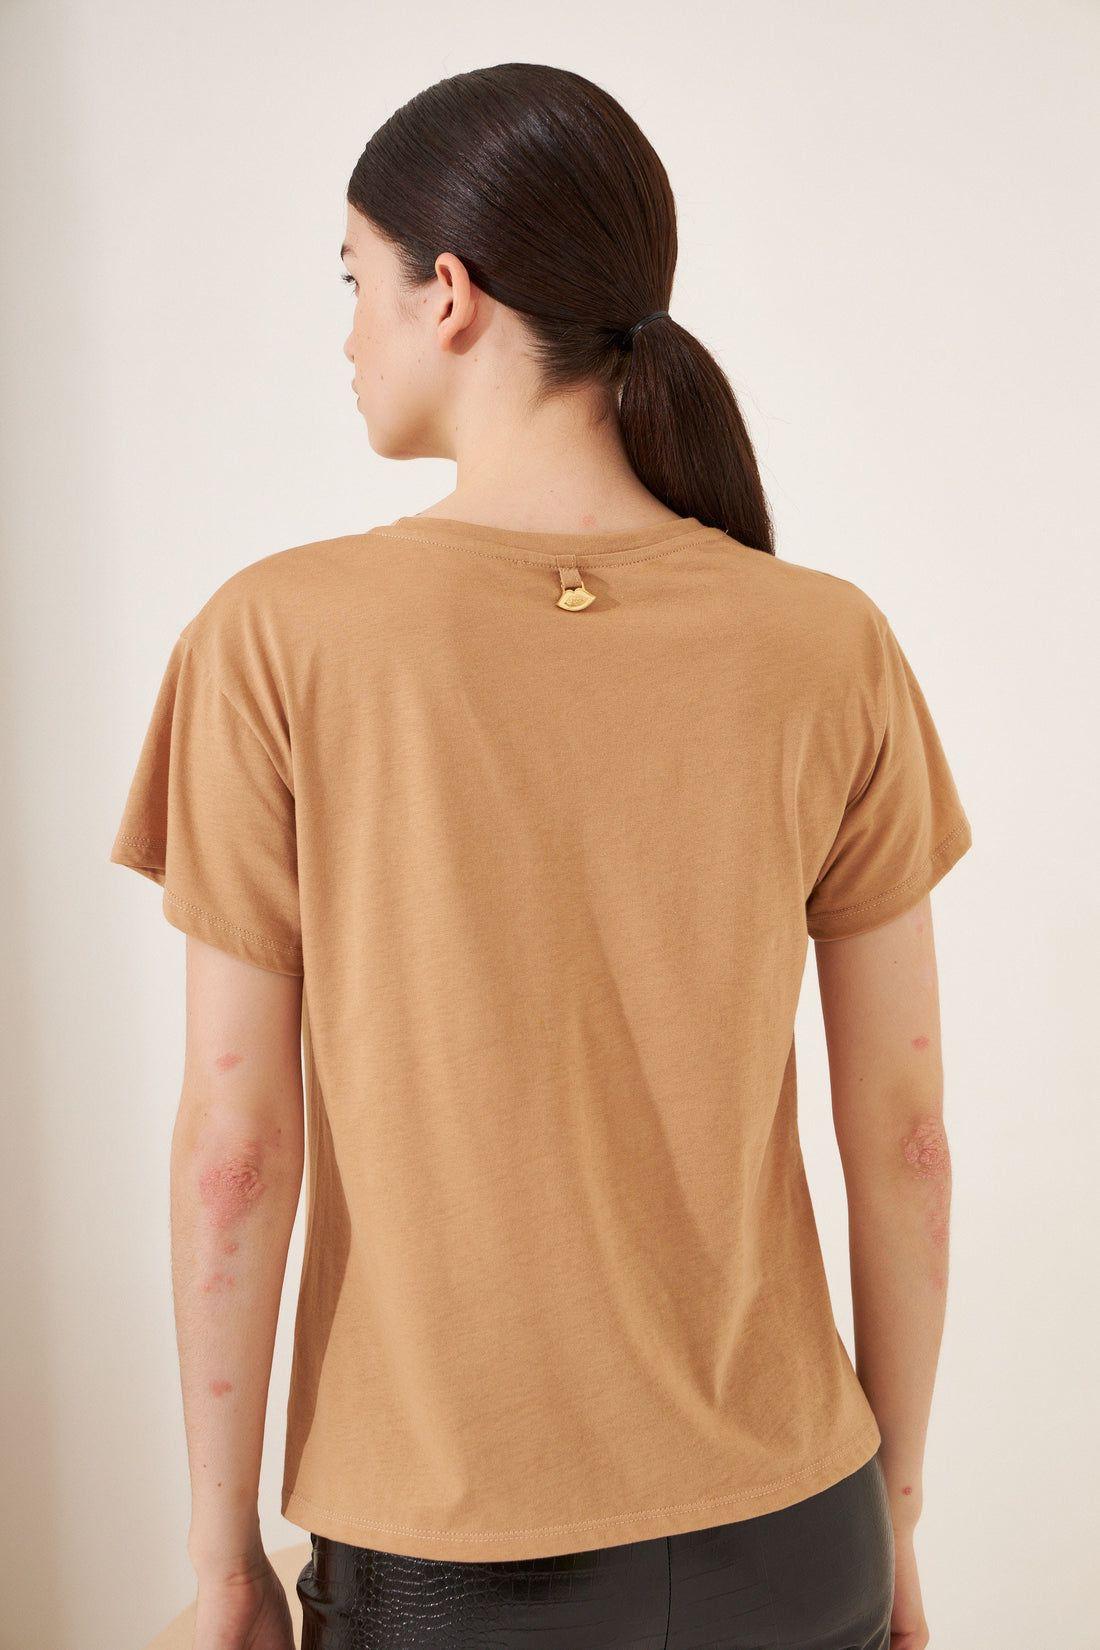 REMERA LUCKY camel s/m